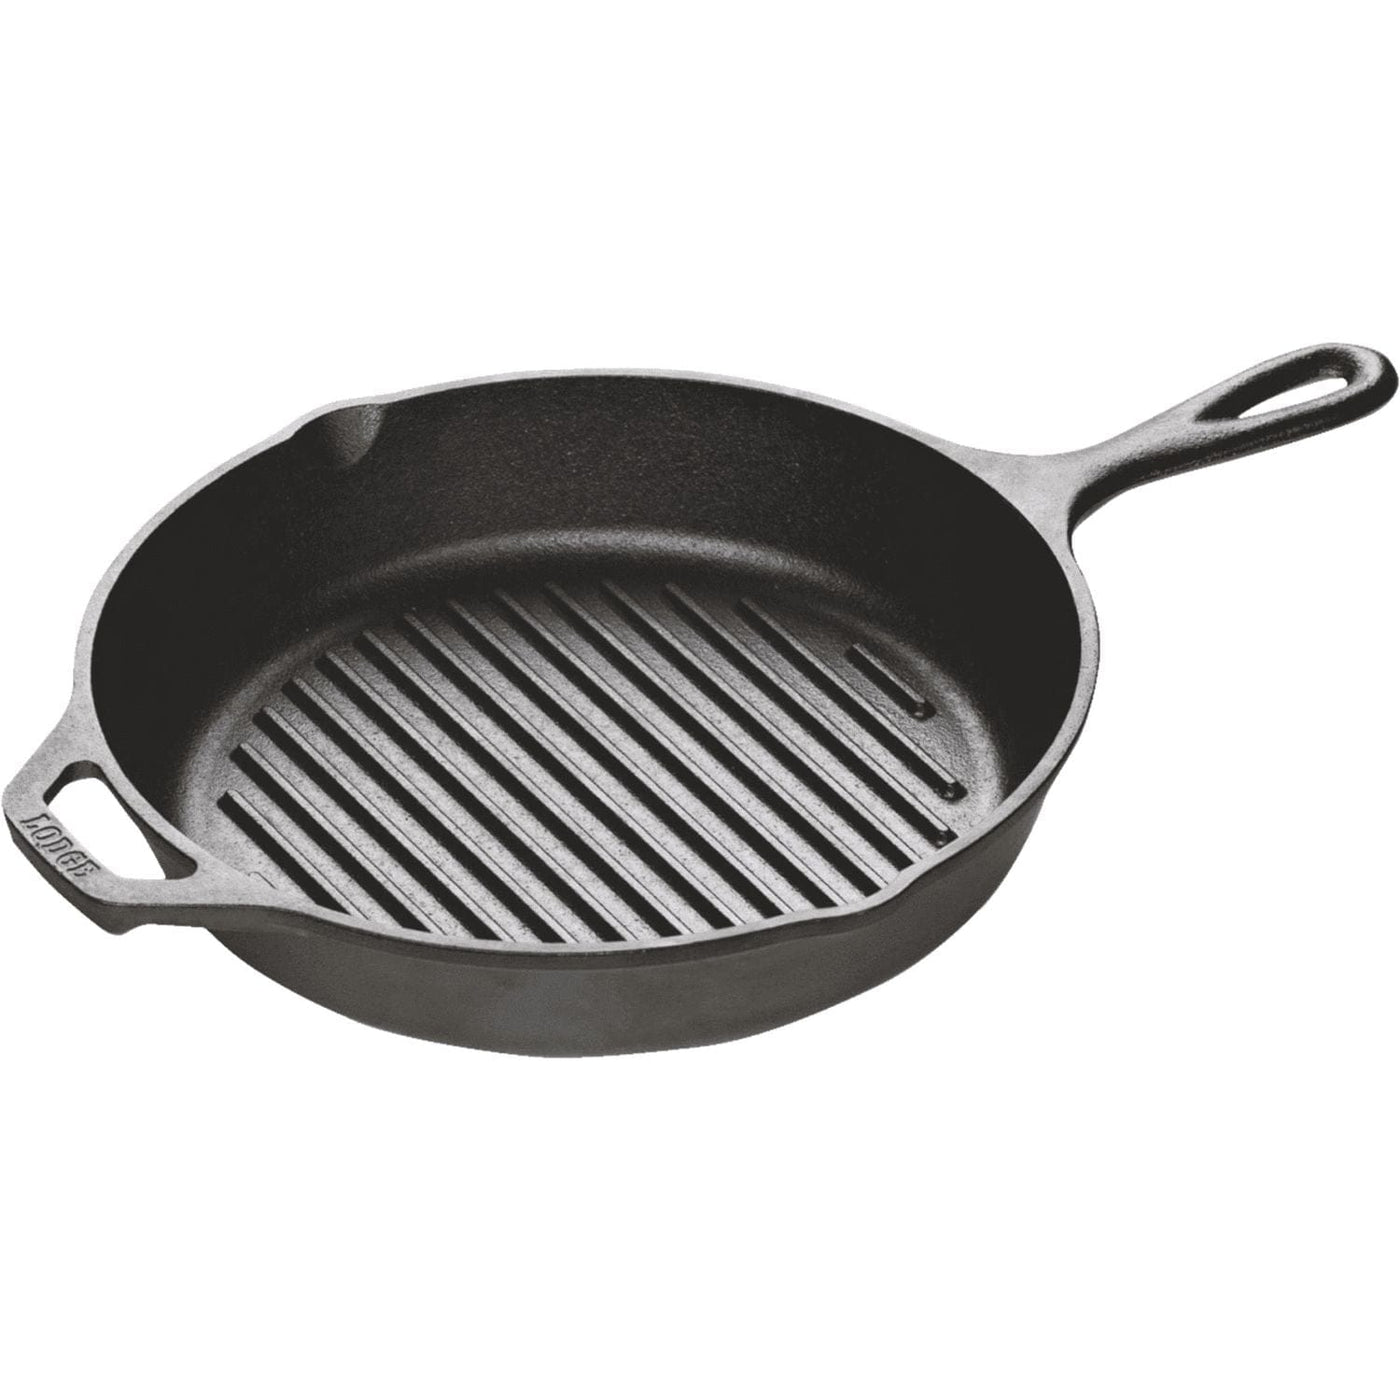 Lodge Cast Iron Lodge L8GP3 10.25 Inch Round Cast Iron Grill Pan Camping And Outdoor